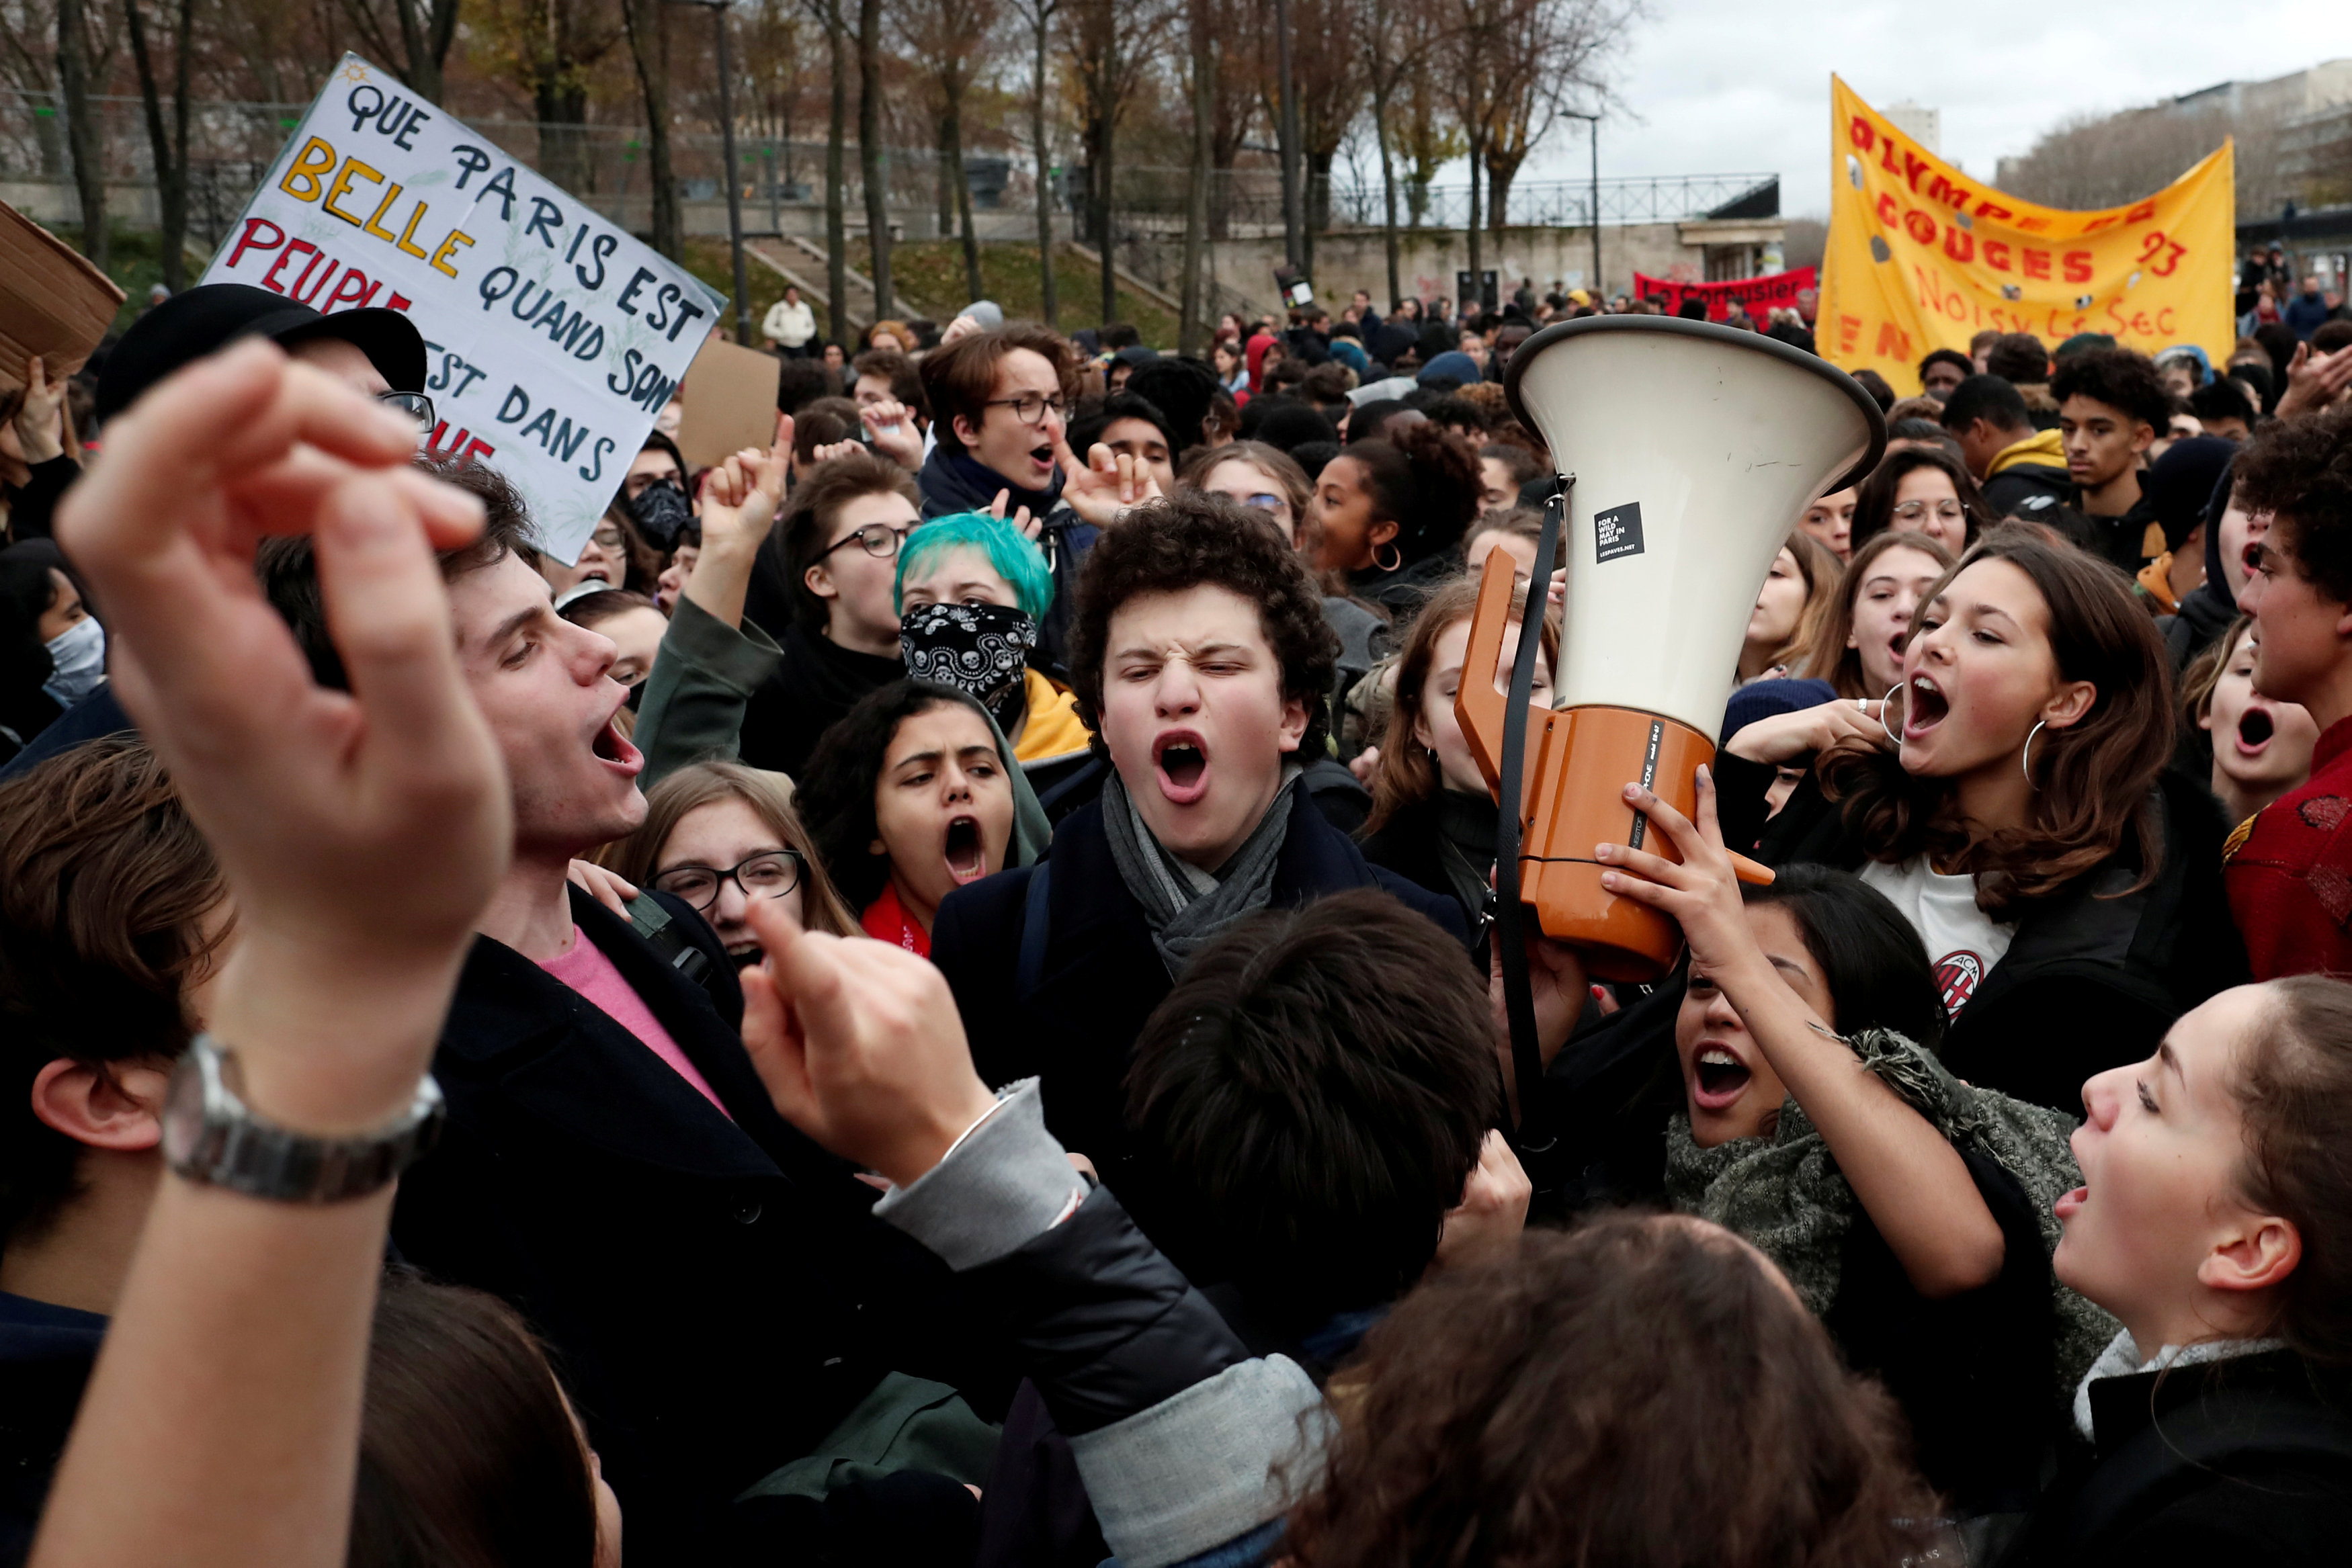 2018-12-07T125958Z_704889843_RC11685A6100_RTRMADP_3_FRANCE-PROTESTS-STUDENTS